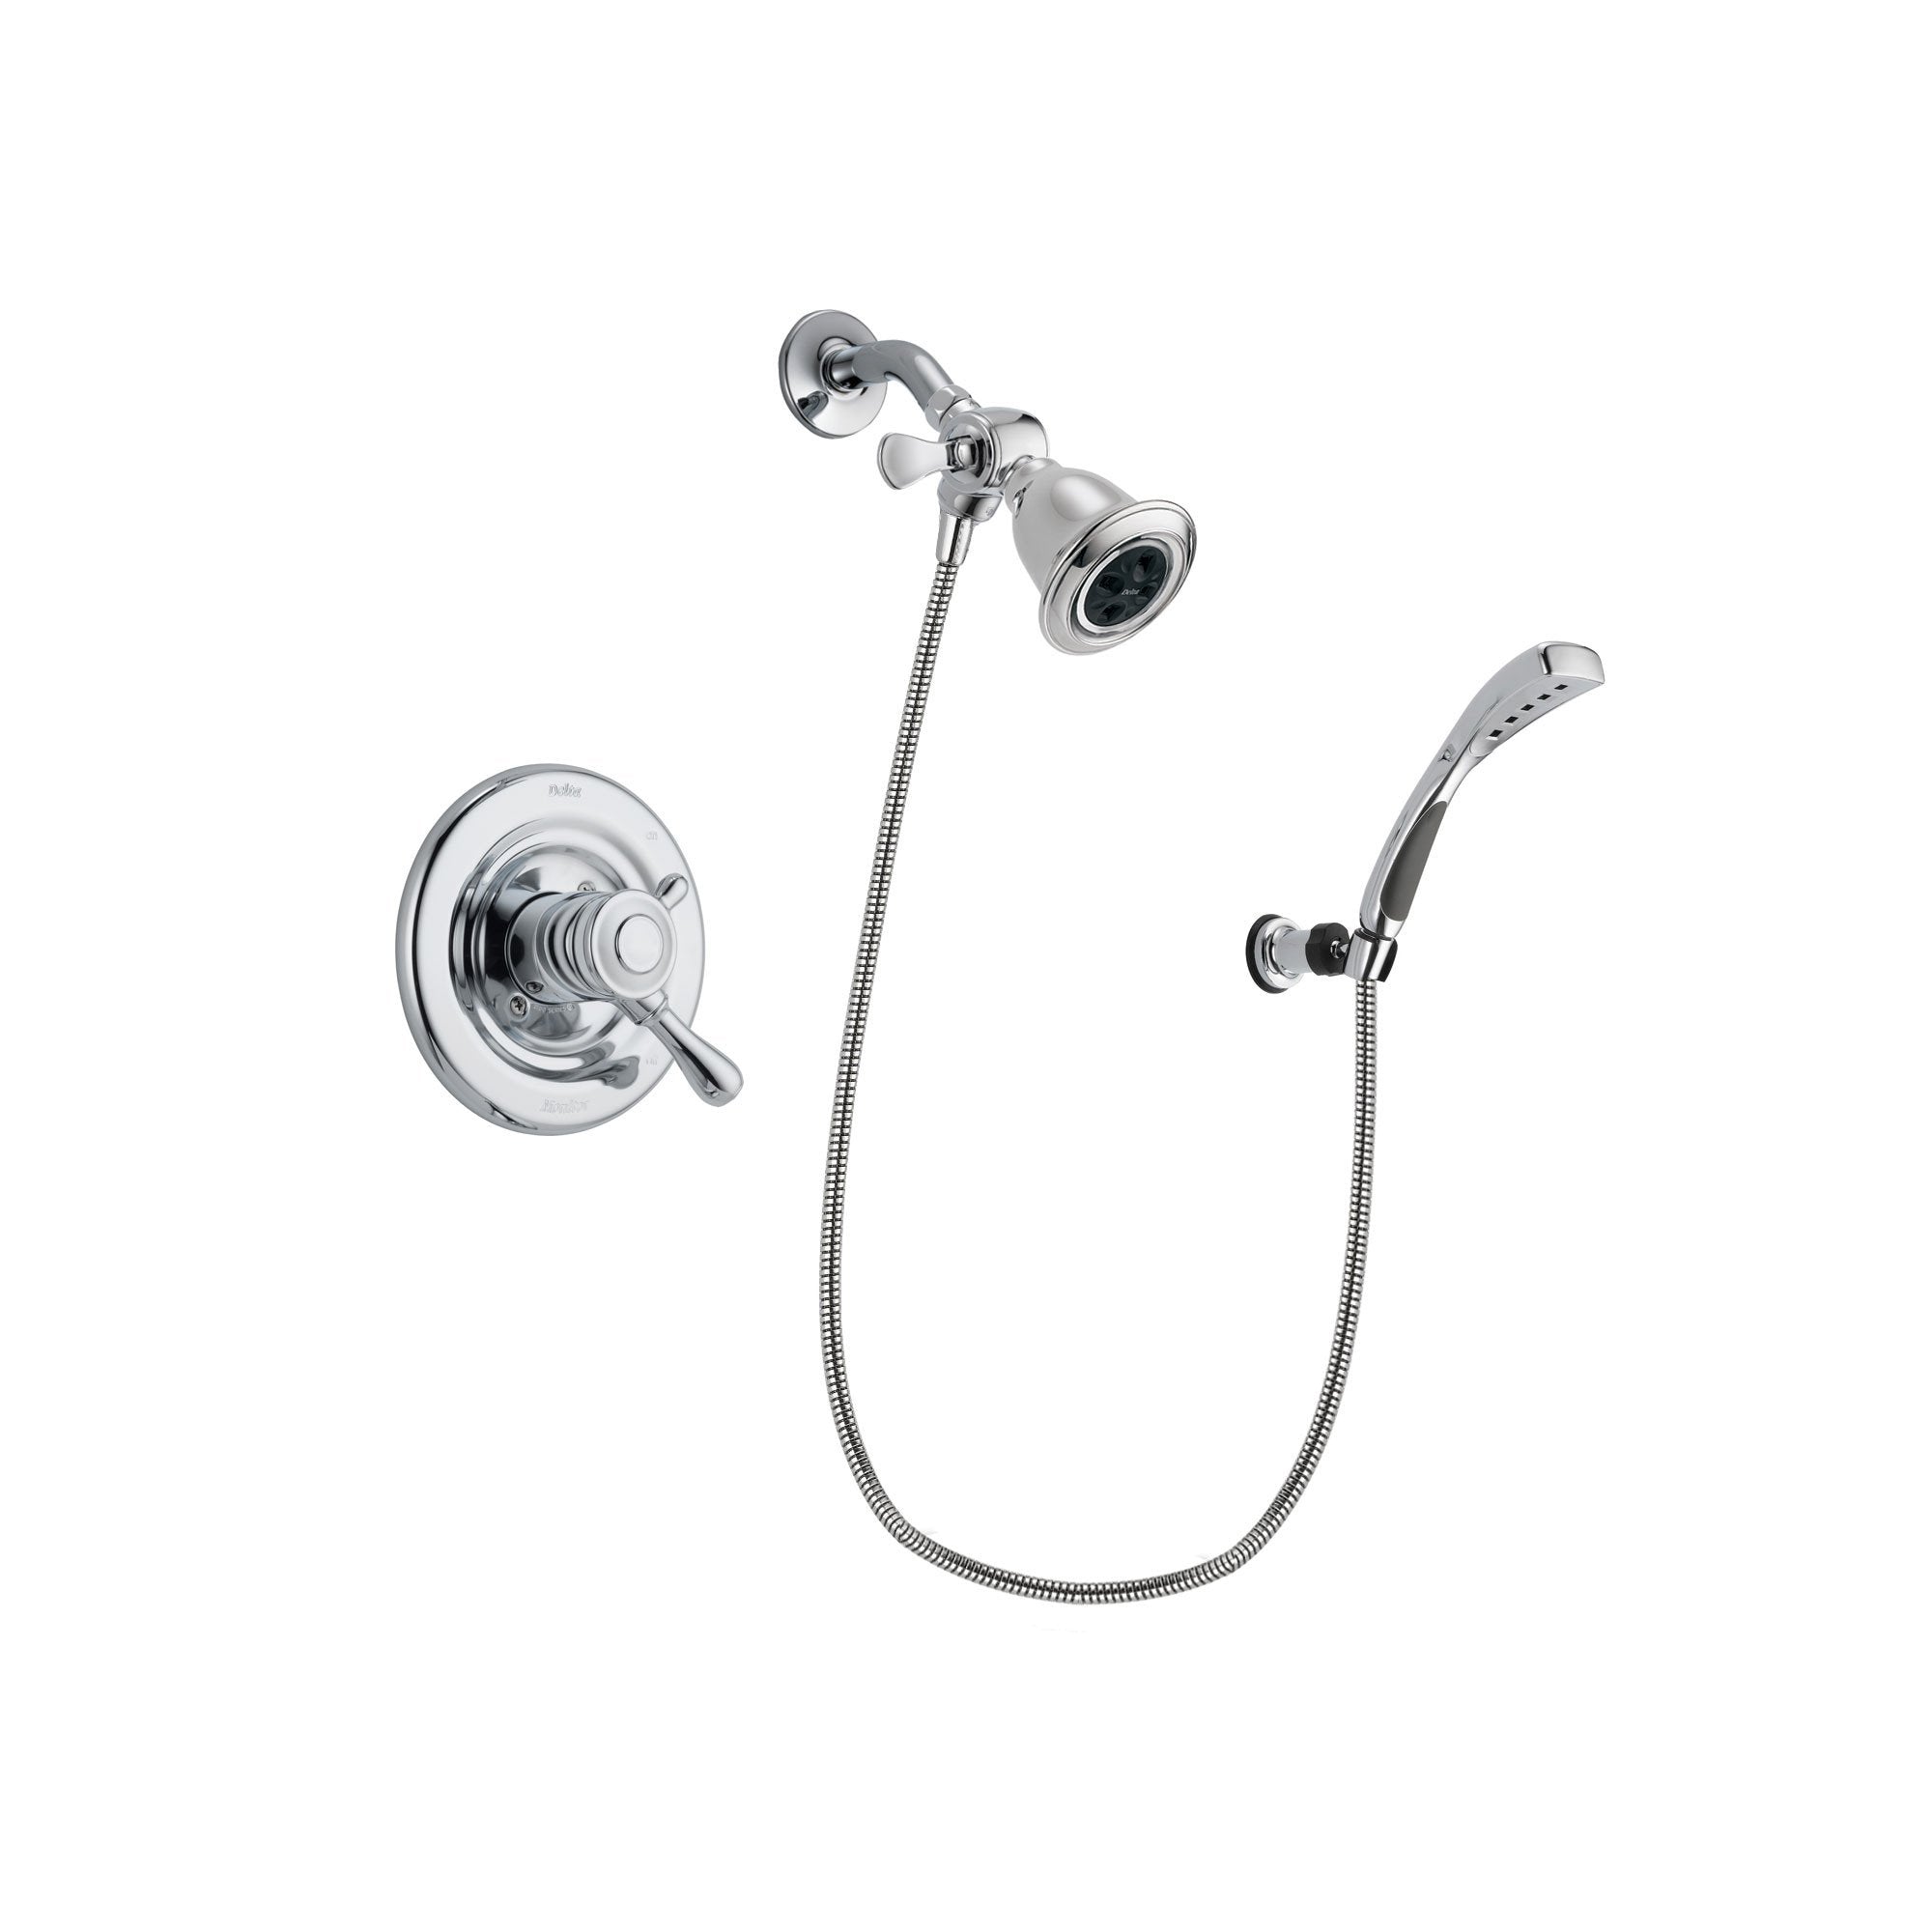 Delta Leland Chrome Finish Dual Control Shower Faucet System Package with Water Efficient Showerhead and Wall-Mount Bracket with Handheld Shower Spray Includes Rough-in Valve DSP1030V